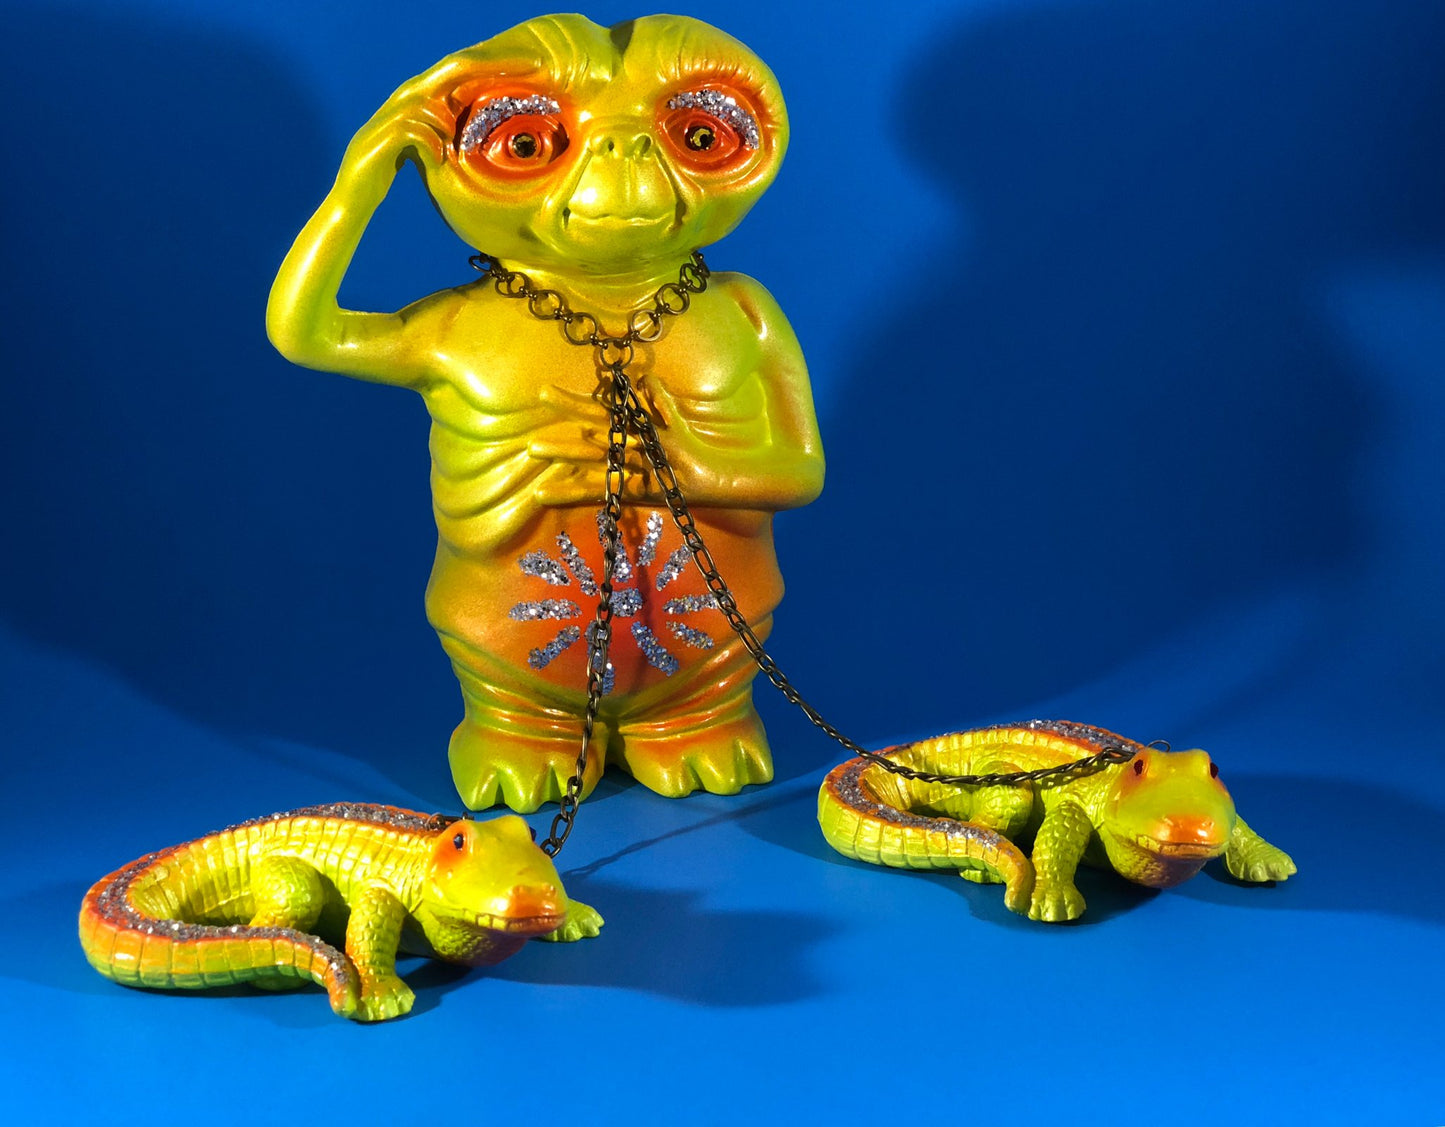 Stomachache and headache ET with crocodiles: Yellow and orange with glitter and chains